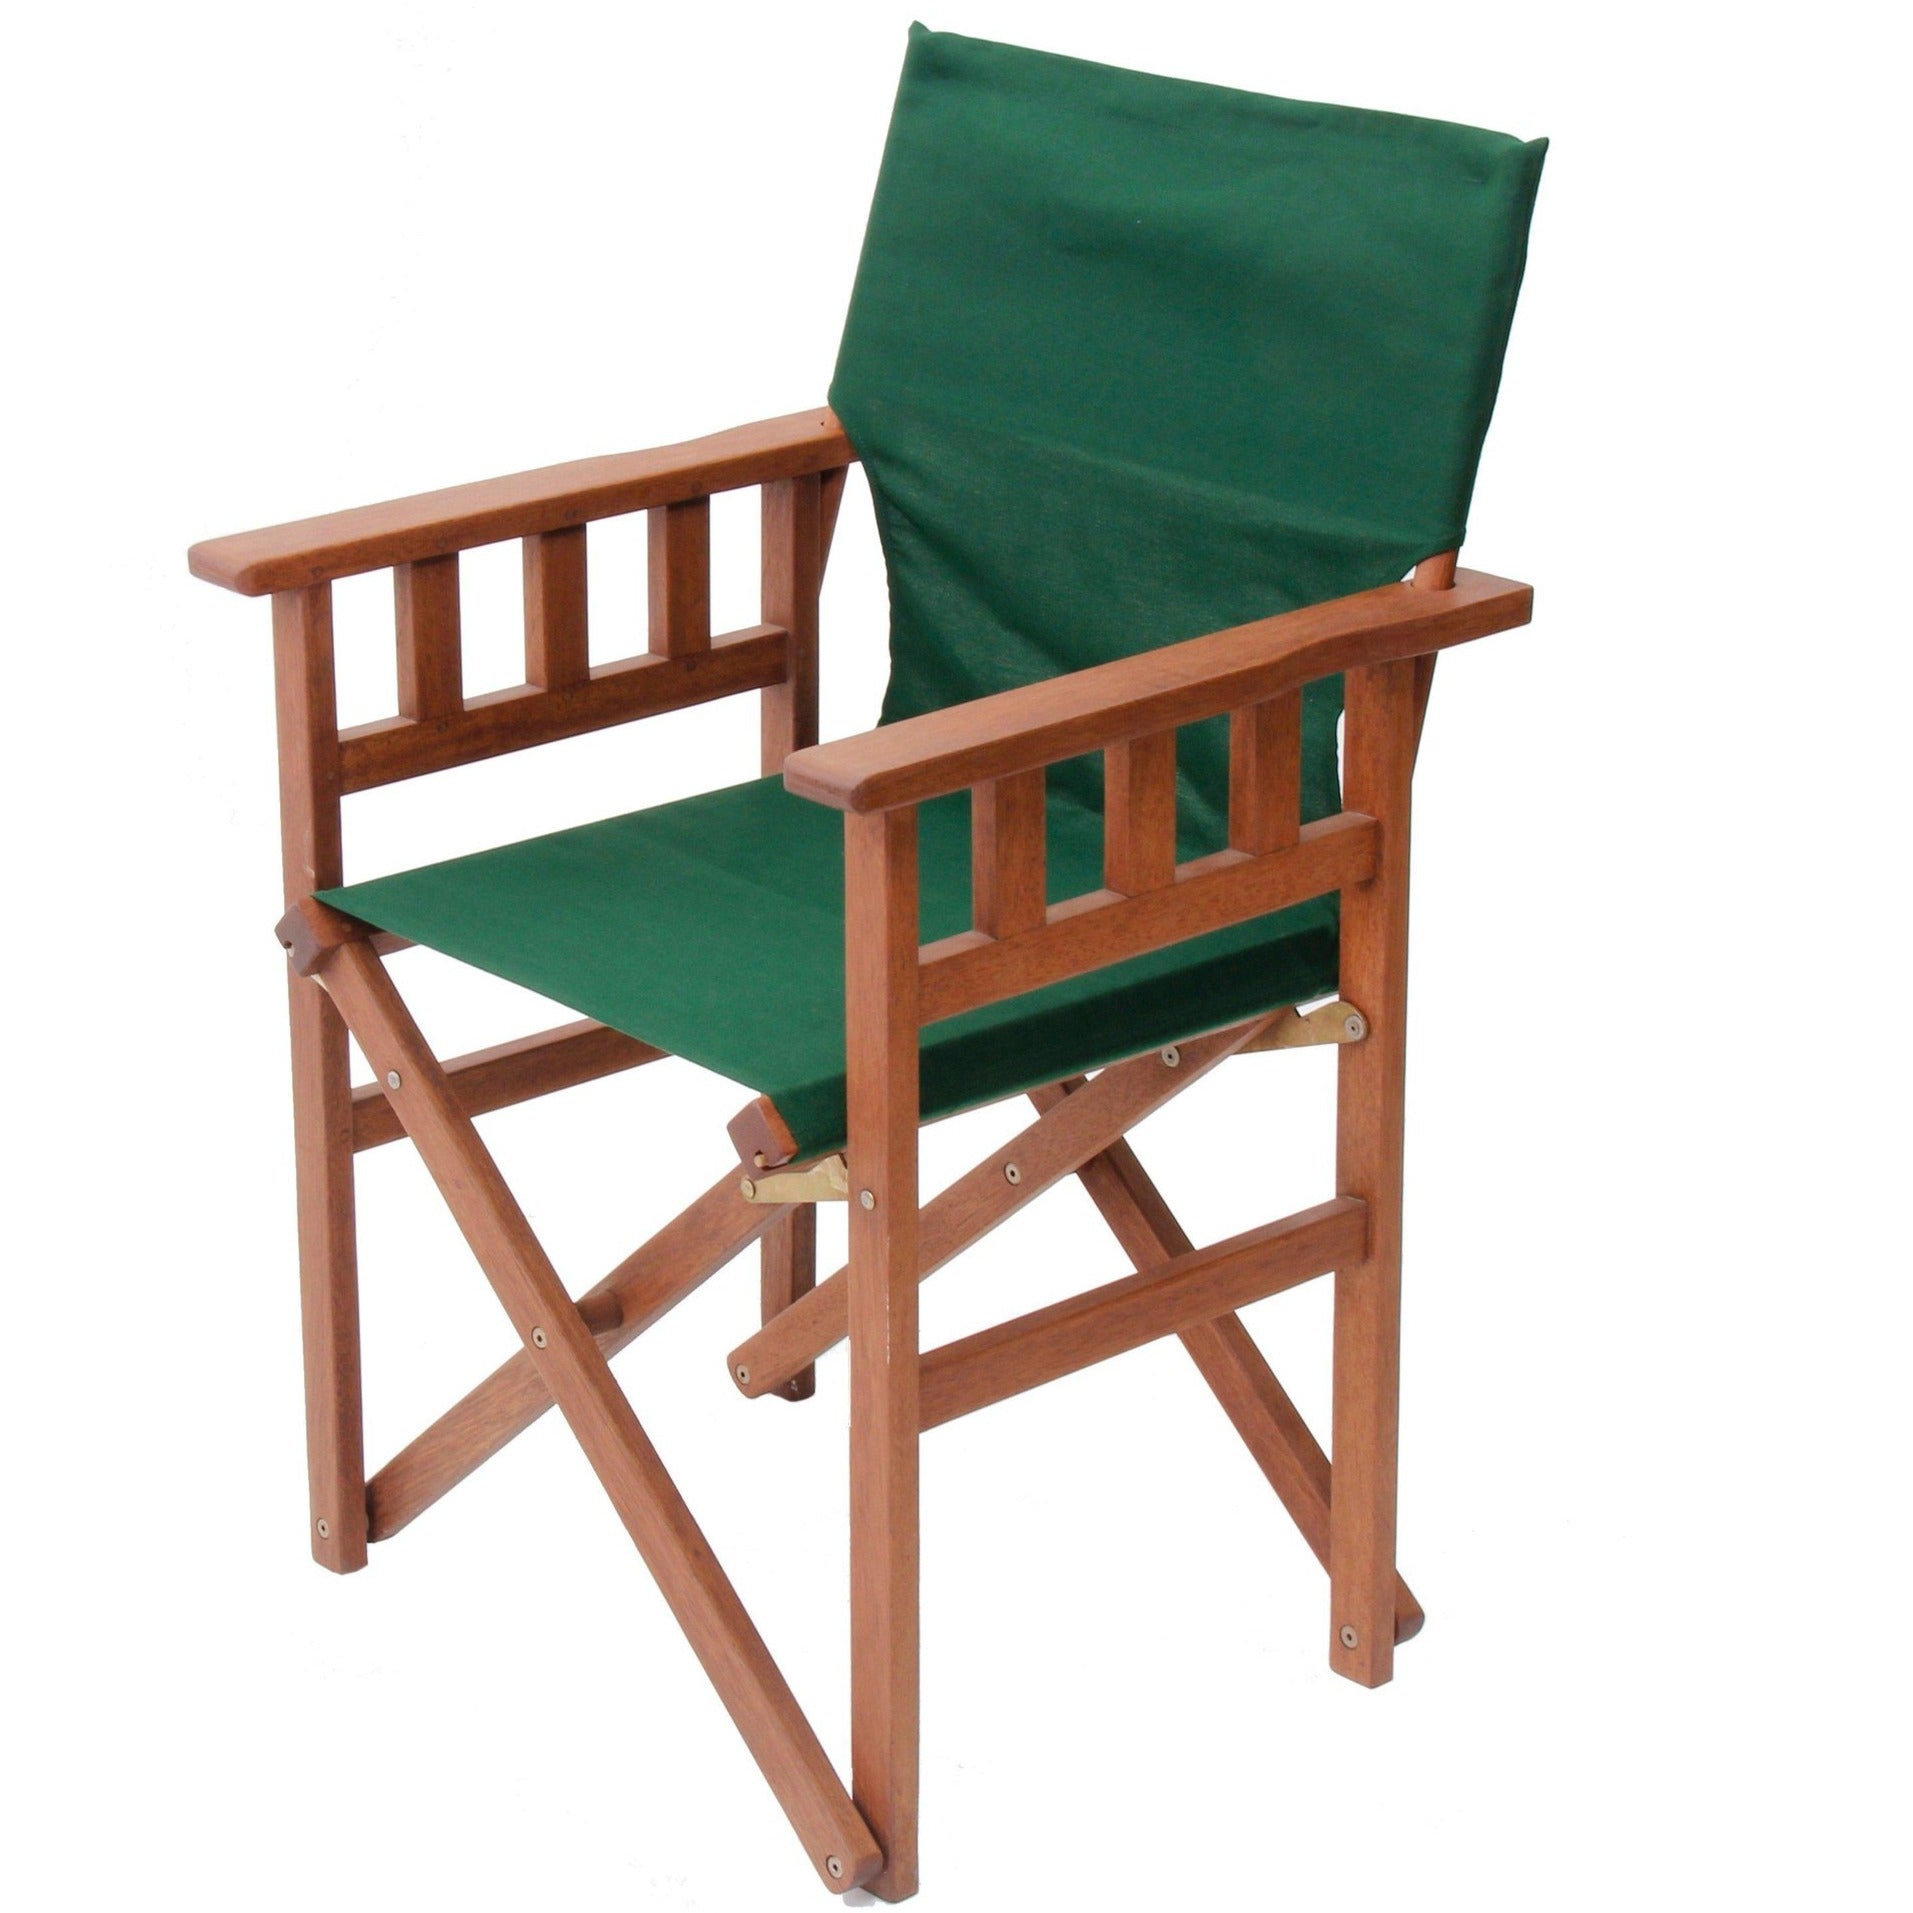 Pangean Campaign Chair, Forest Green, from Byer of Maine